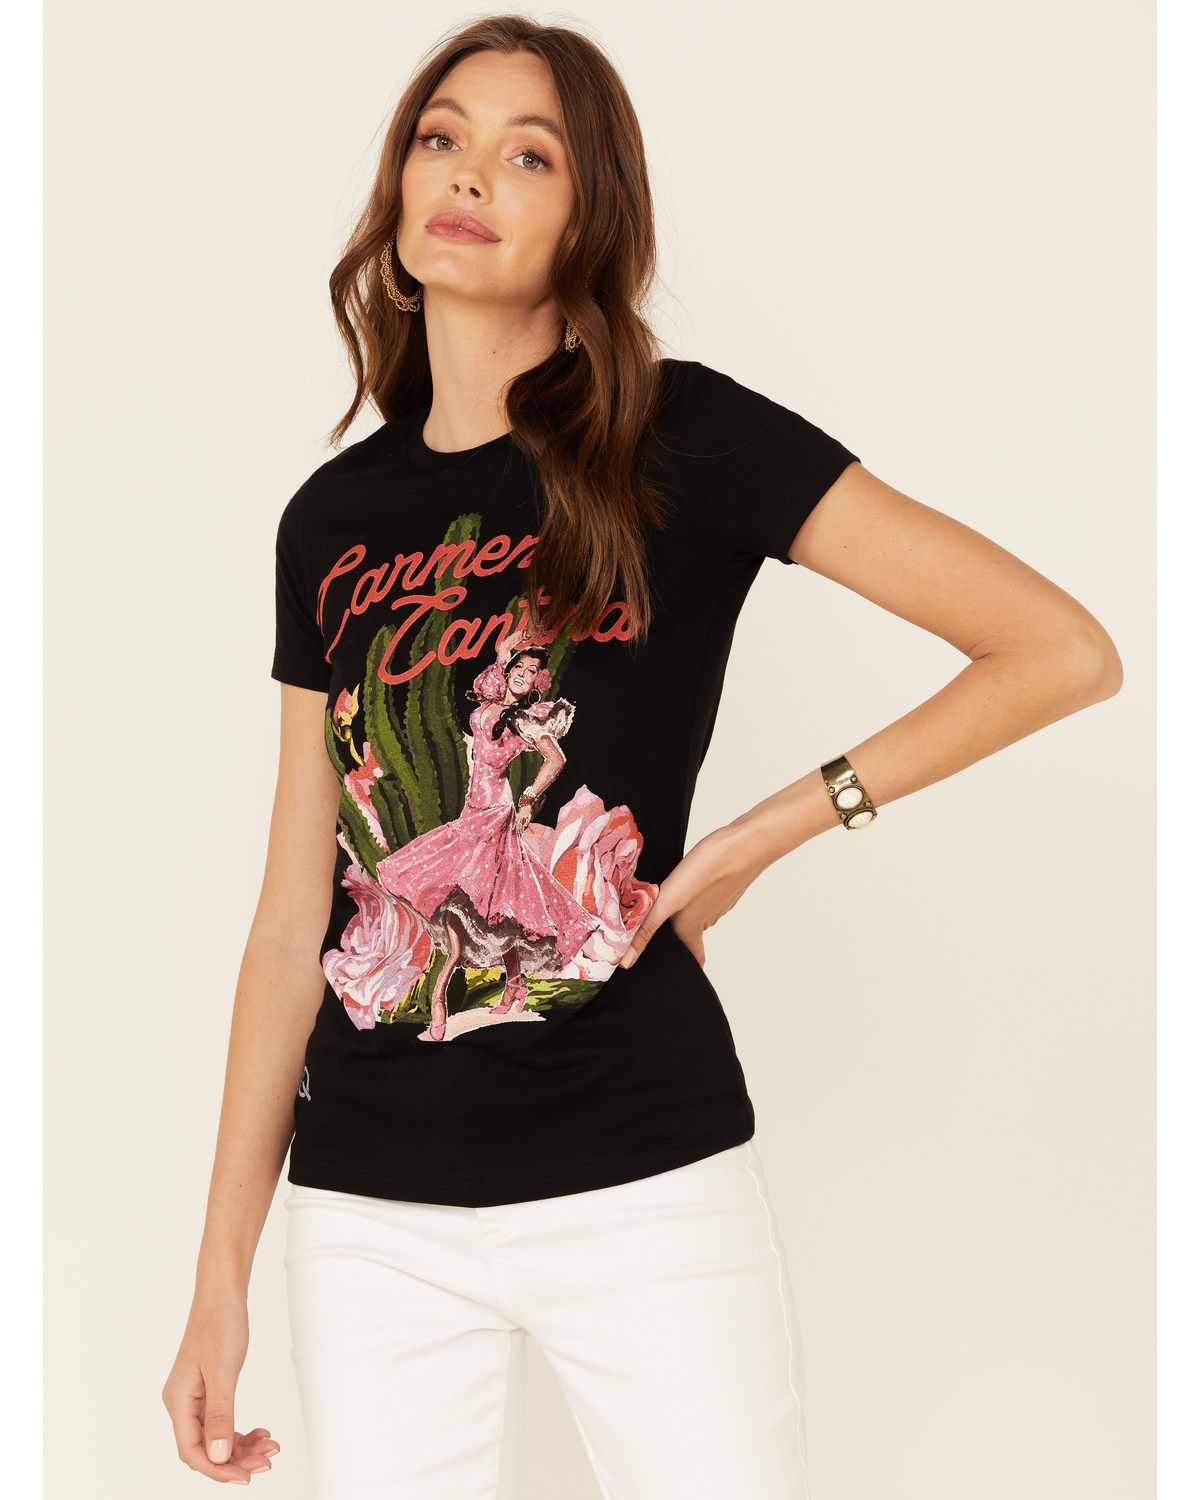 Rodeo Quincy Women's Carmen Cantina Graphic Short Sleeve Tee